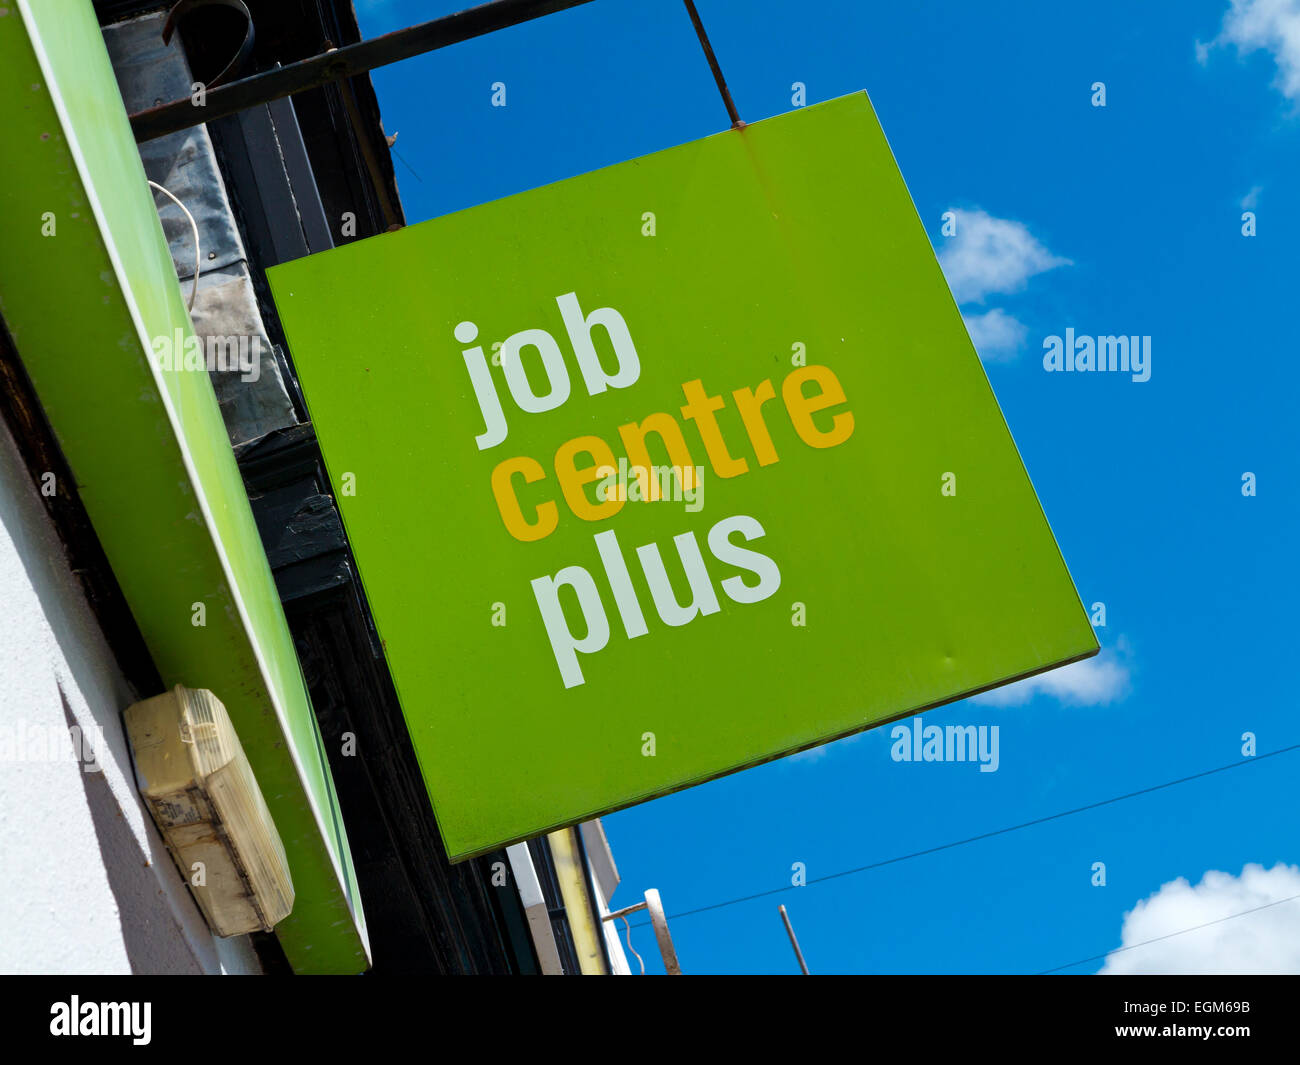 Job Centre Plus sign outside a job centre run by the Department of Work and Pensions or DWP in Bridport Dorset England UK Stock Photo